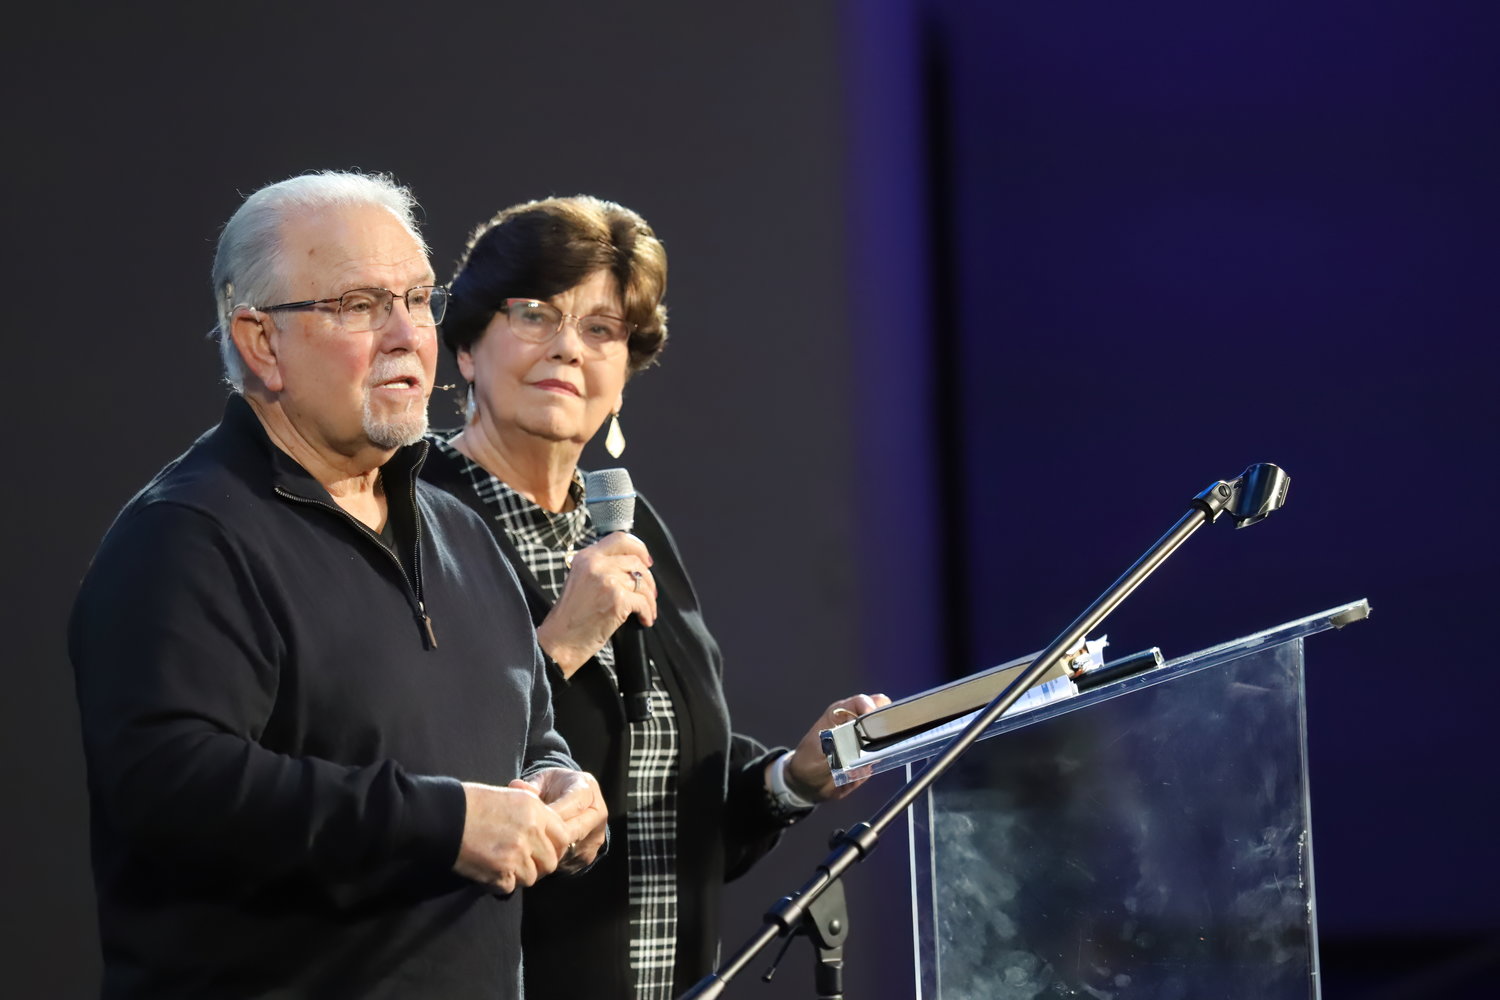 Dr. Mike (DOM) and Judy Carlisle prayed for the pastors and their wives during the San Diego Southern Baptist Association 80th Anniversary on Saturday January 14, 2023, El Cajon, CA.